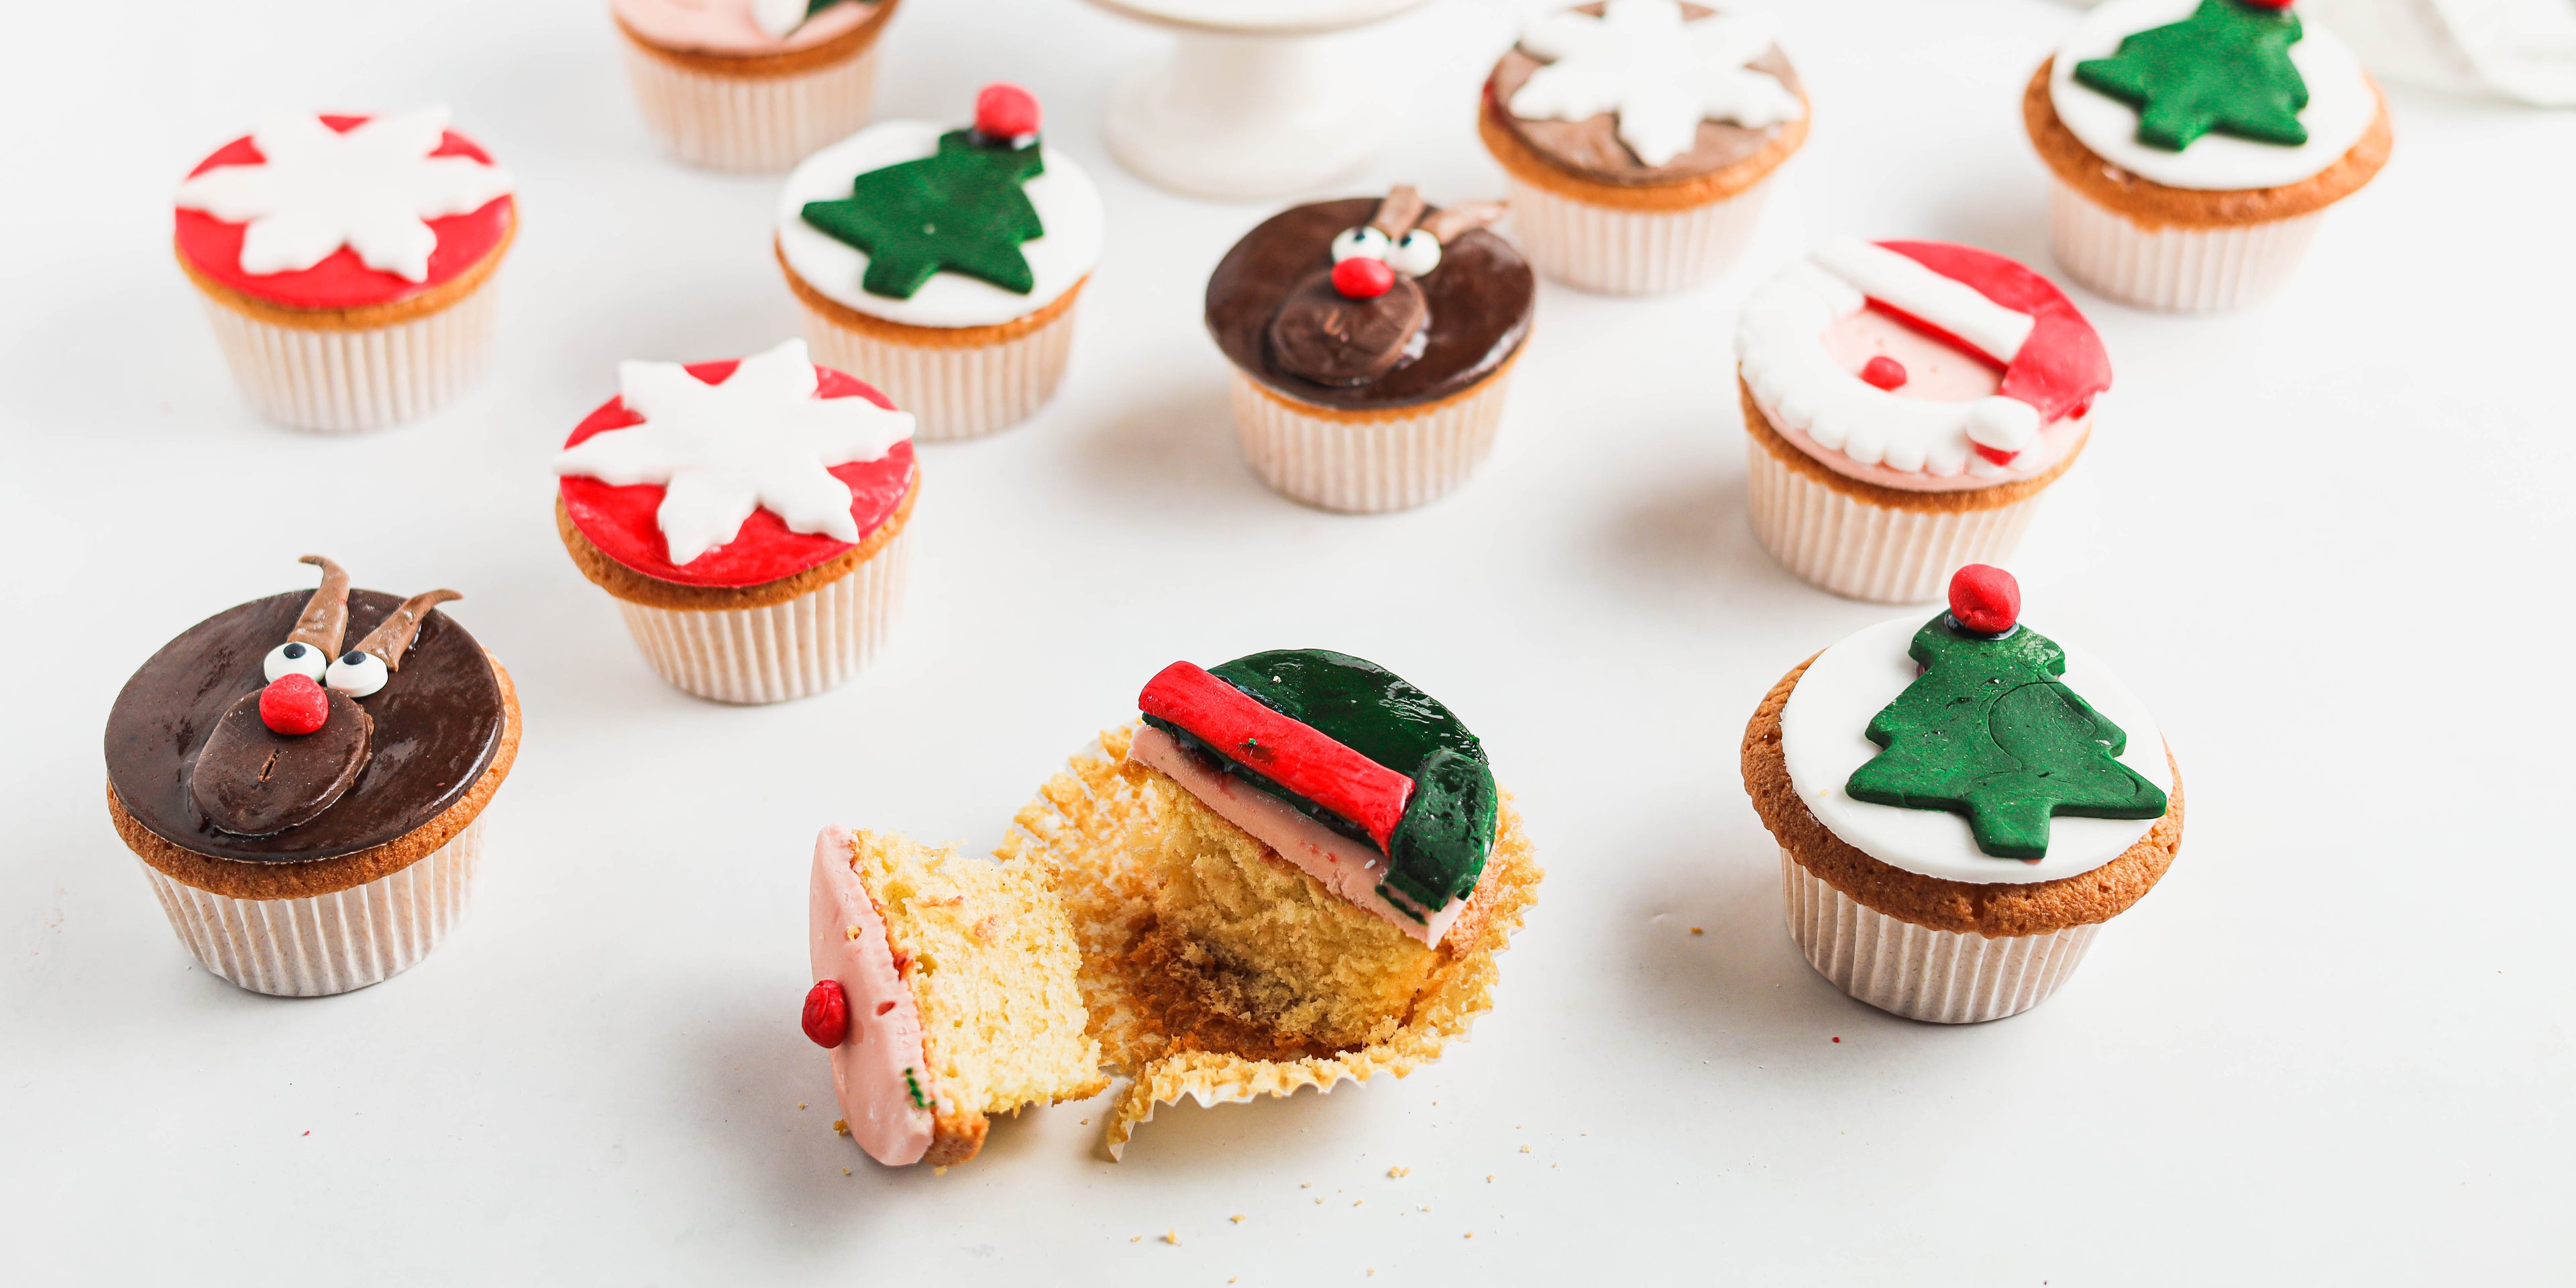 Close up of Christmas Cupcakes with a cupcake cut in half showing the fluffy insides